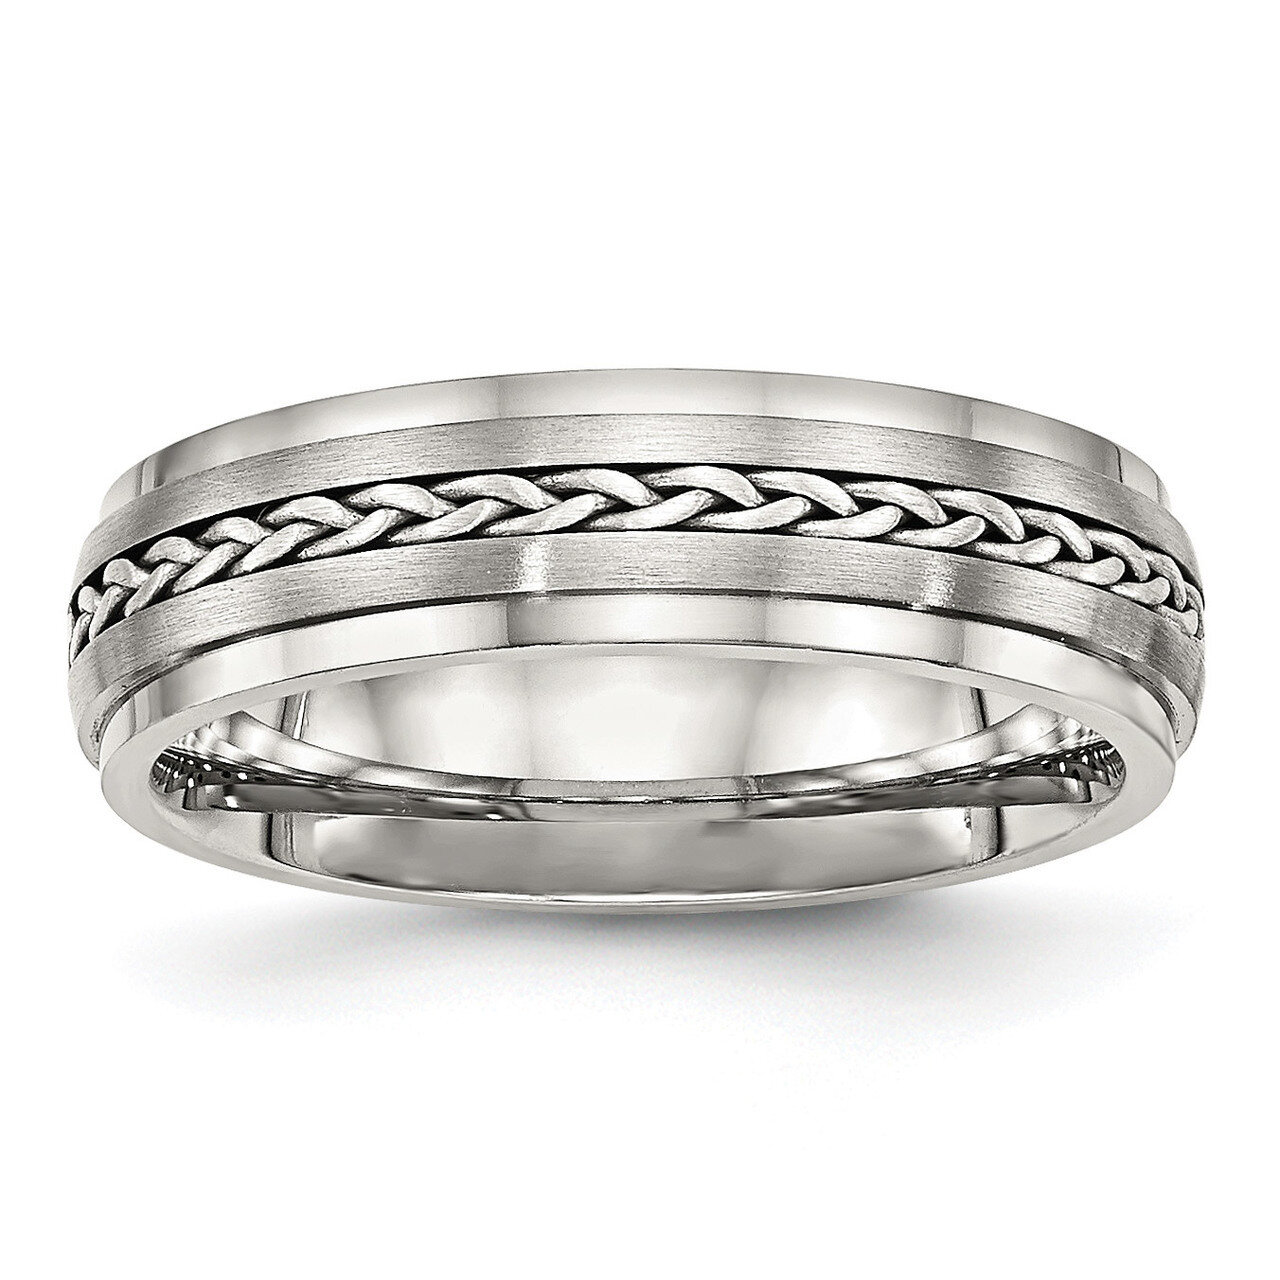 Brushed with Silver Braid Inlay Ring Stainless Steel Polished SR464